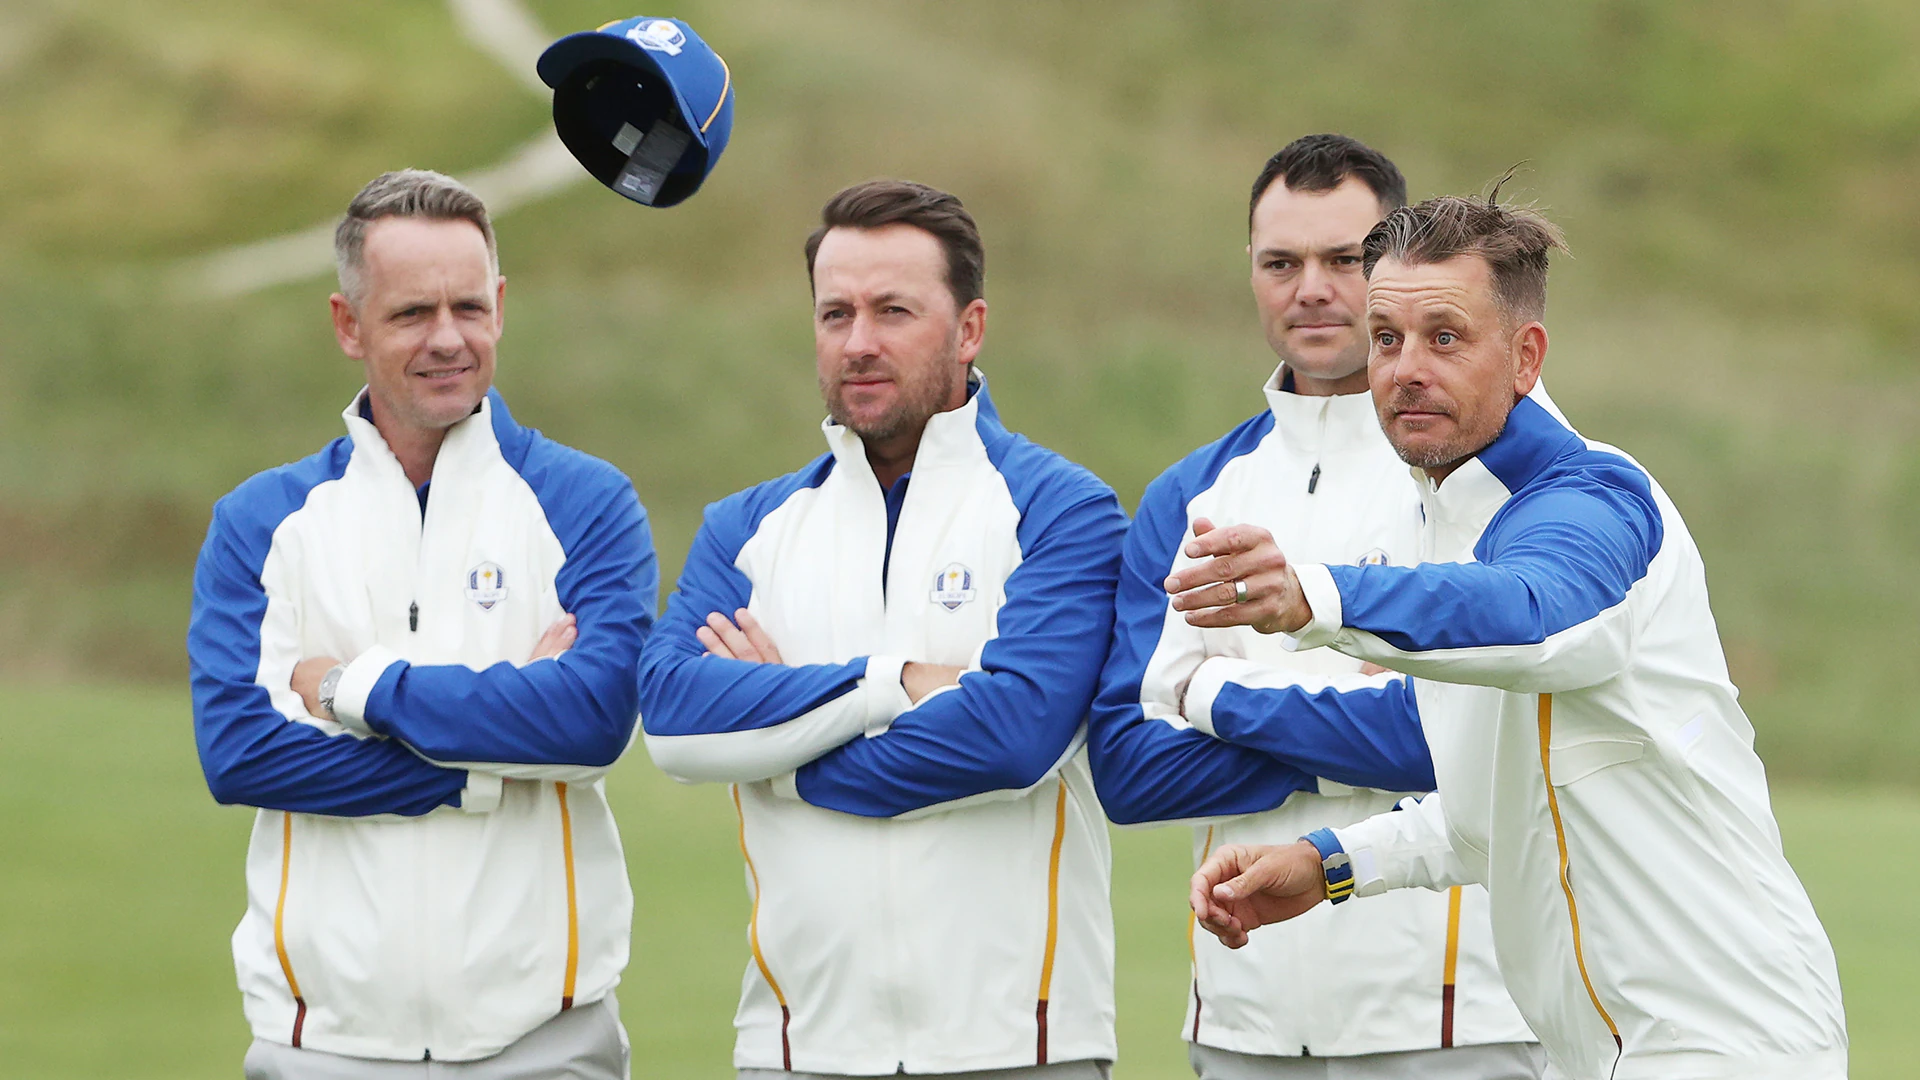 New European Ryder Cup Captain Luke Donald: ‘No Real Clarity’ on LIV Members